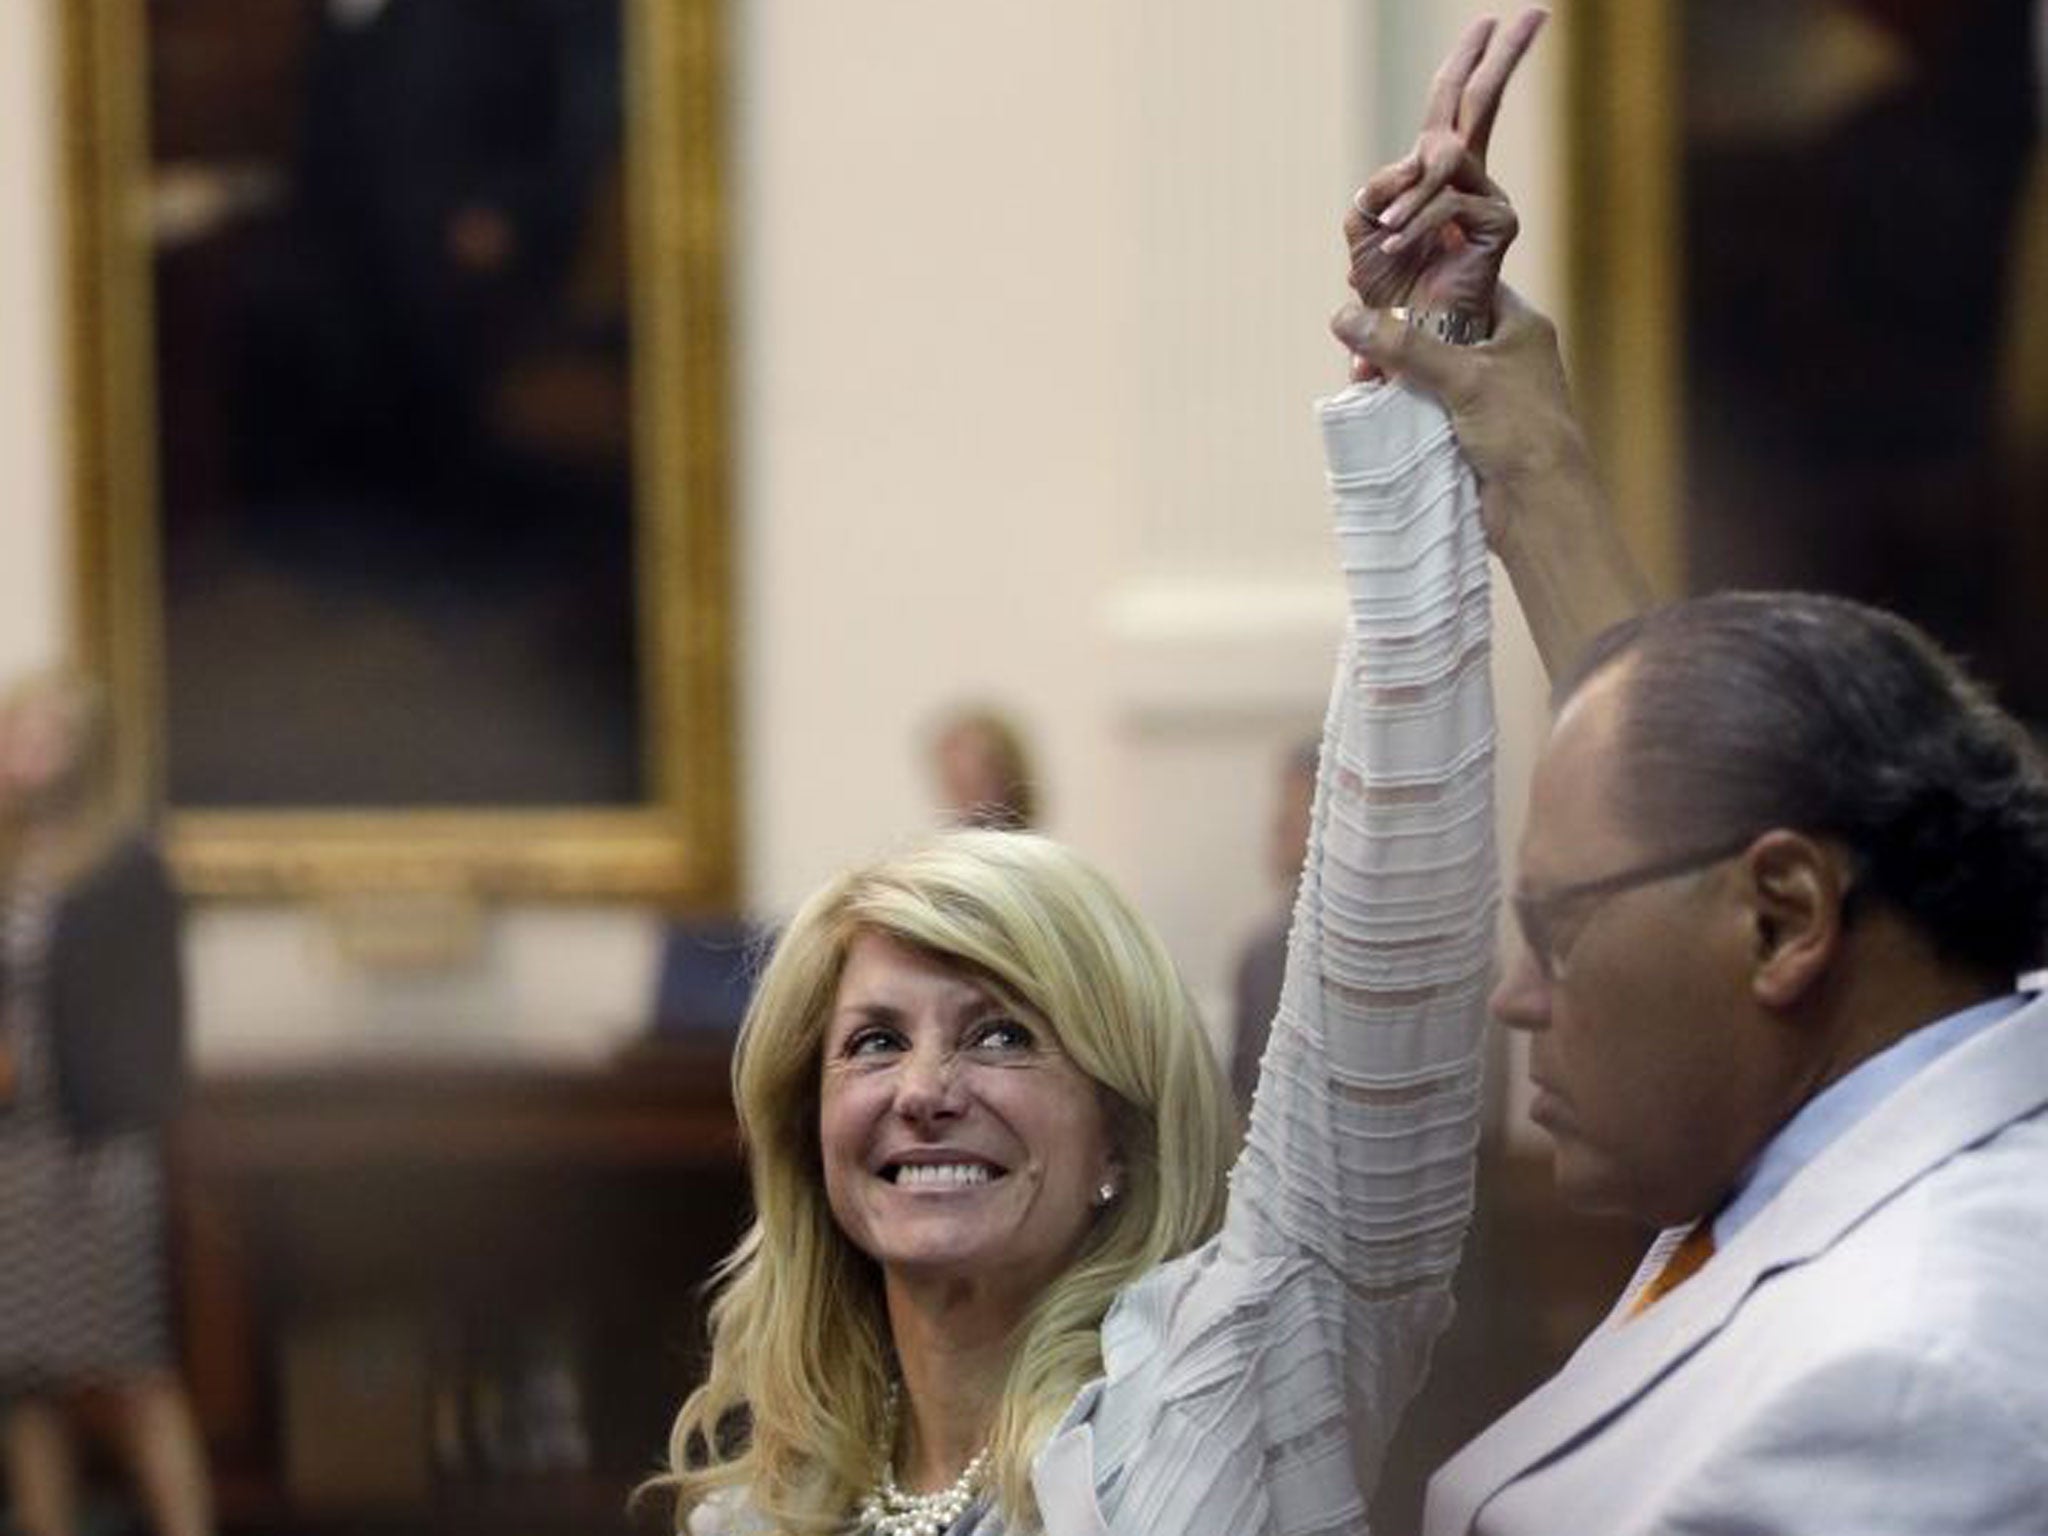 Sen. Wendy Davis, D-Fort Worth, left, who tries to filibuster an abortion bill, reacts as time expires (AP)